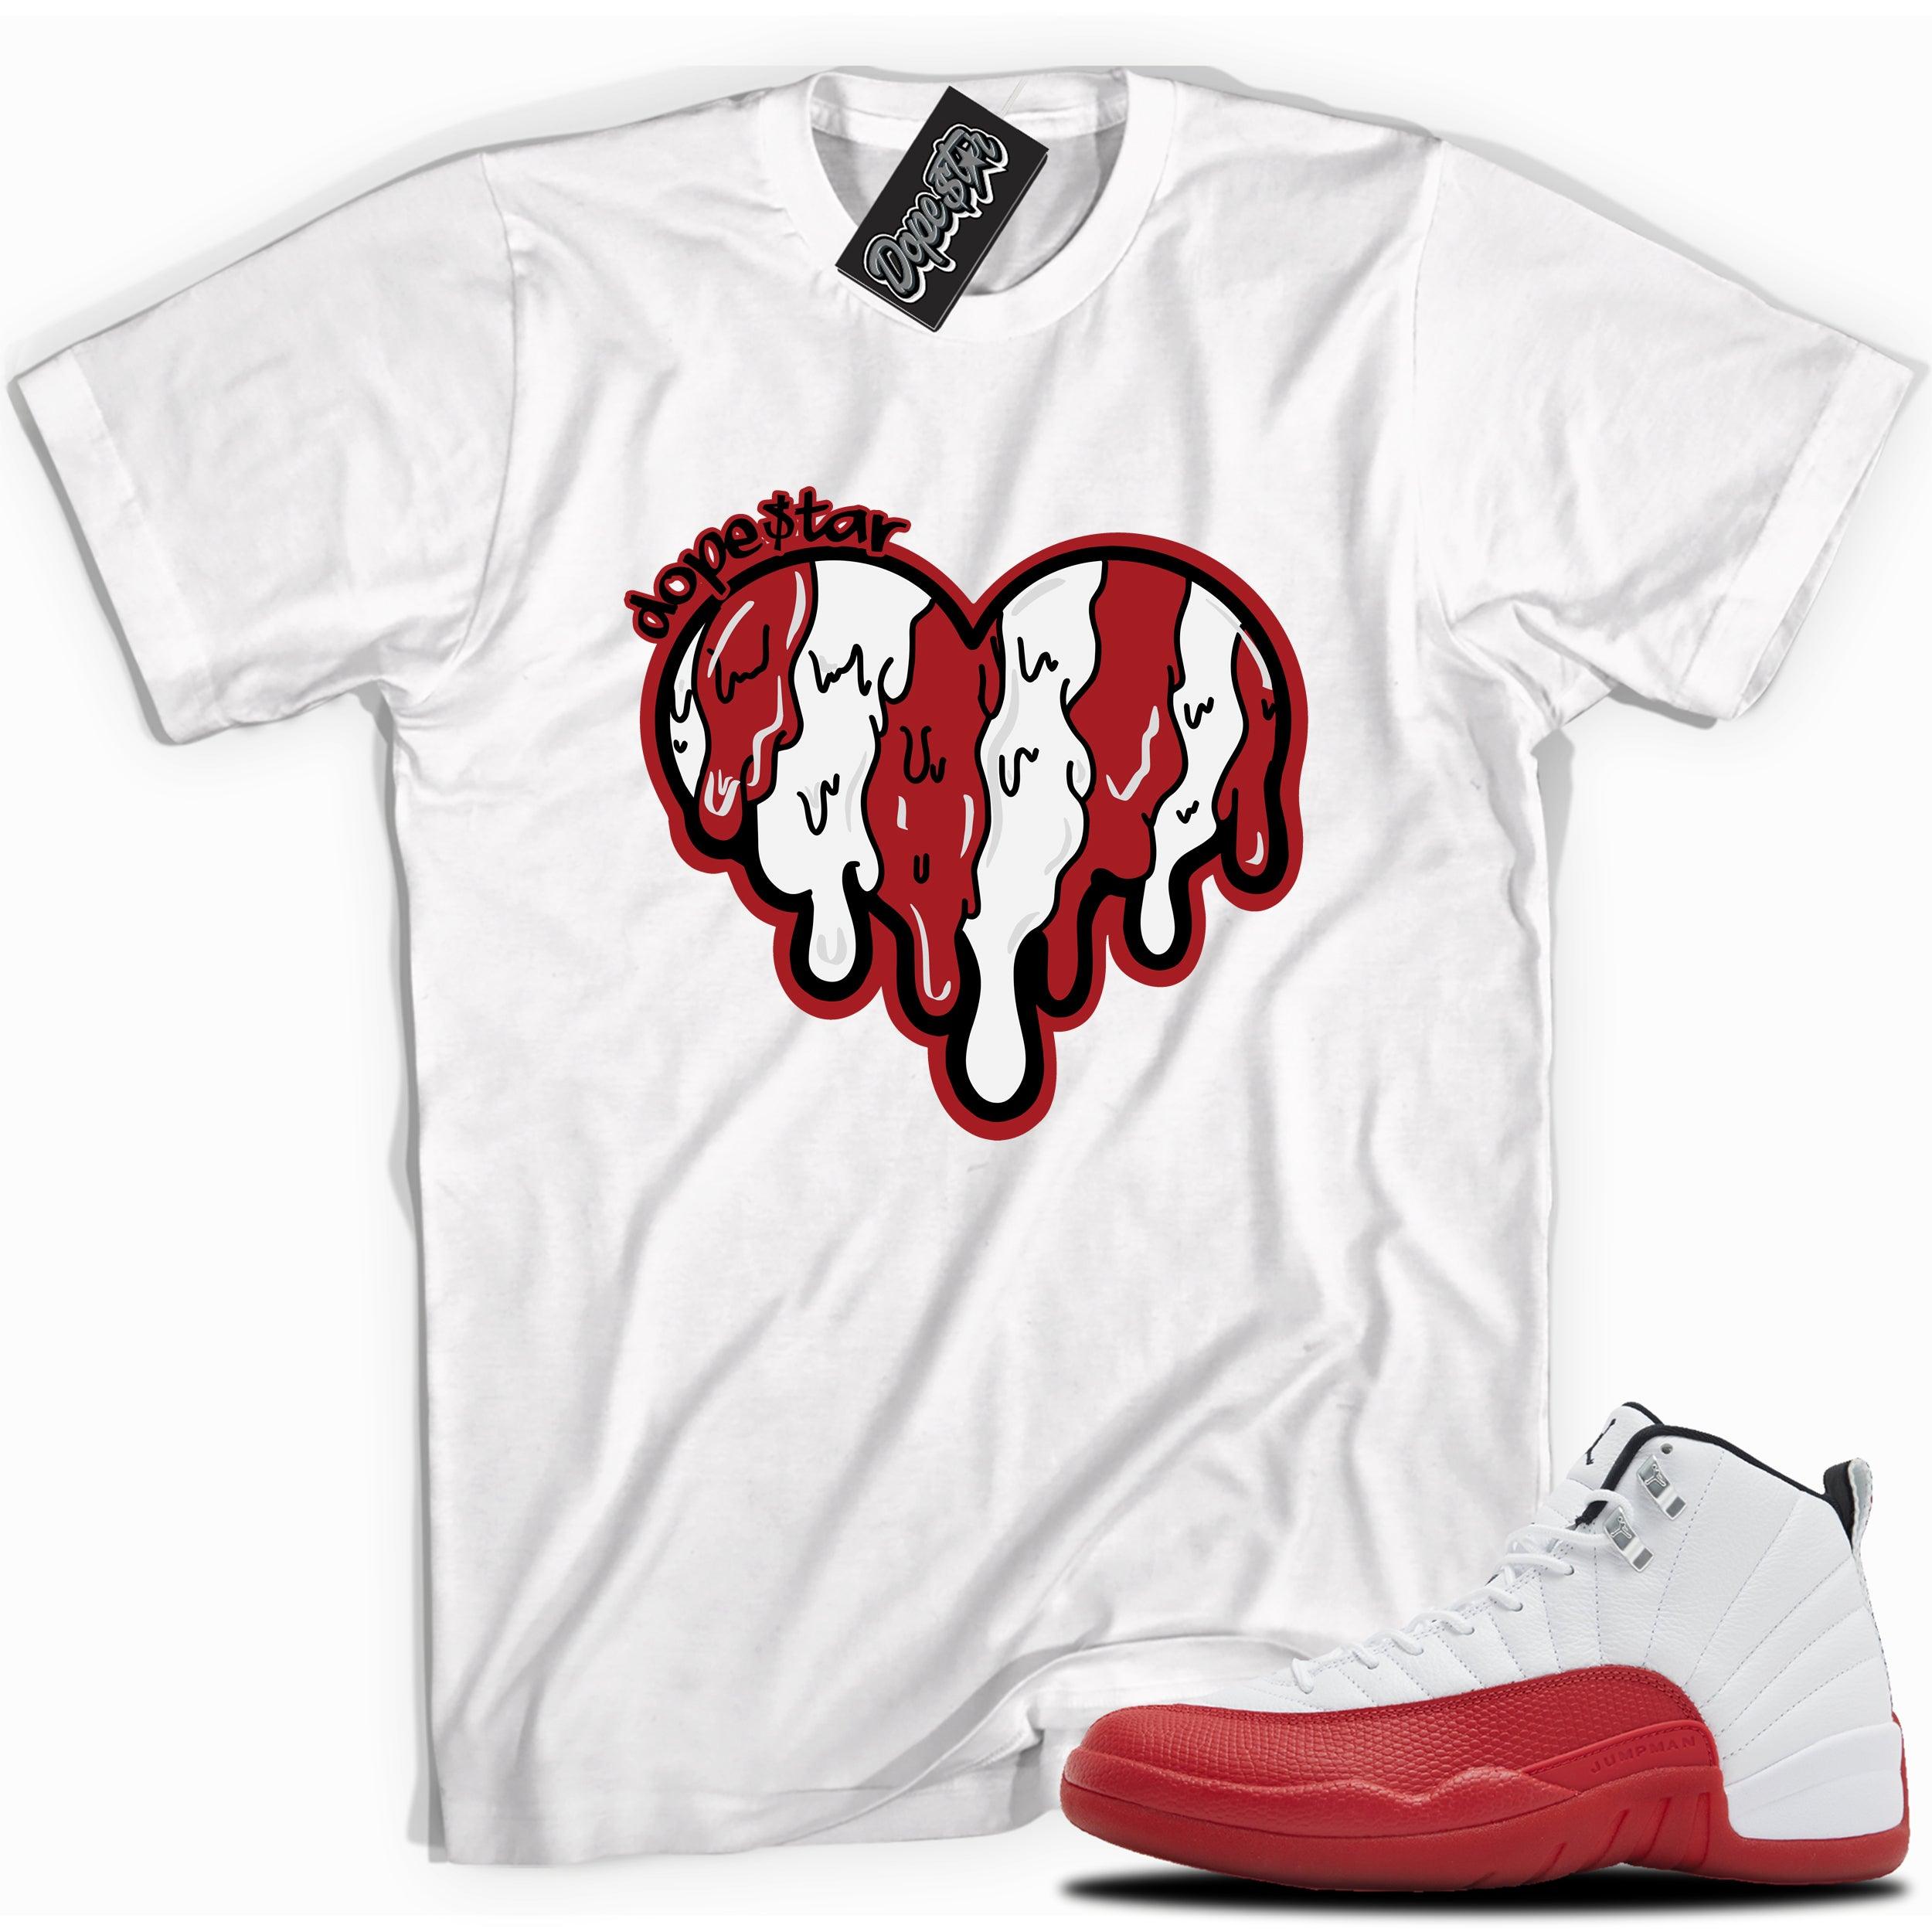 Cool White graphic tee with “ MELTING HEART” print, that perfectly matches Air Jordan 12 Retro Cherry Red 2023 red and white sneakers 